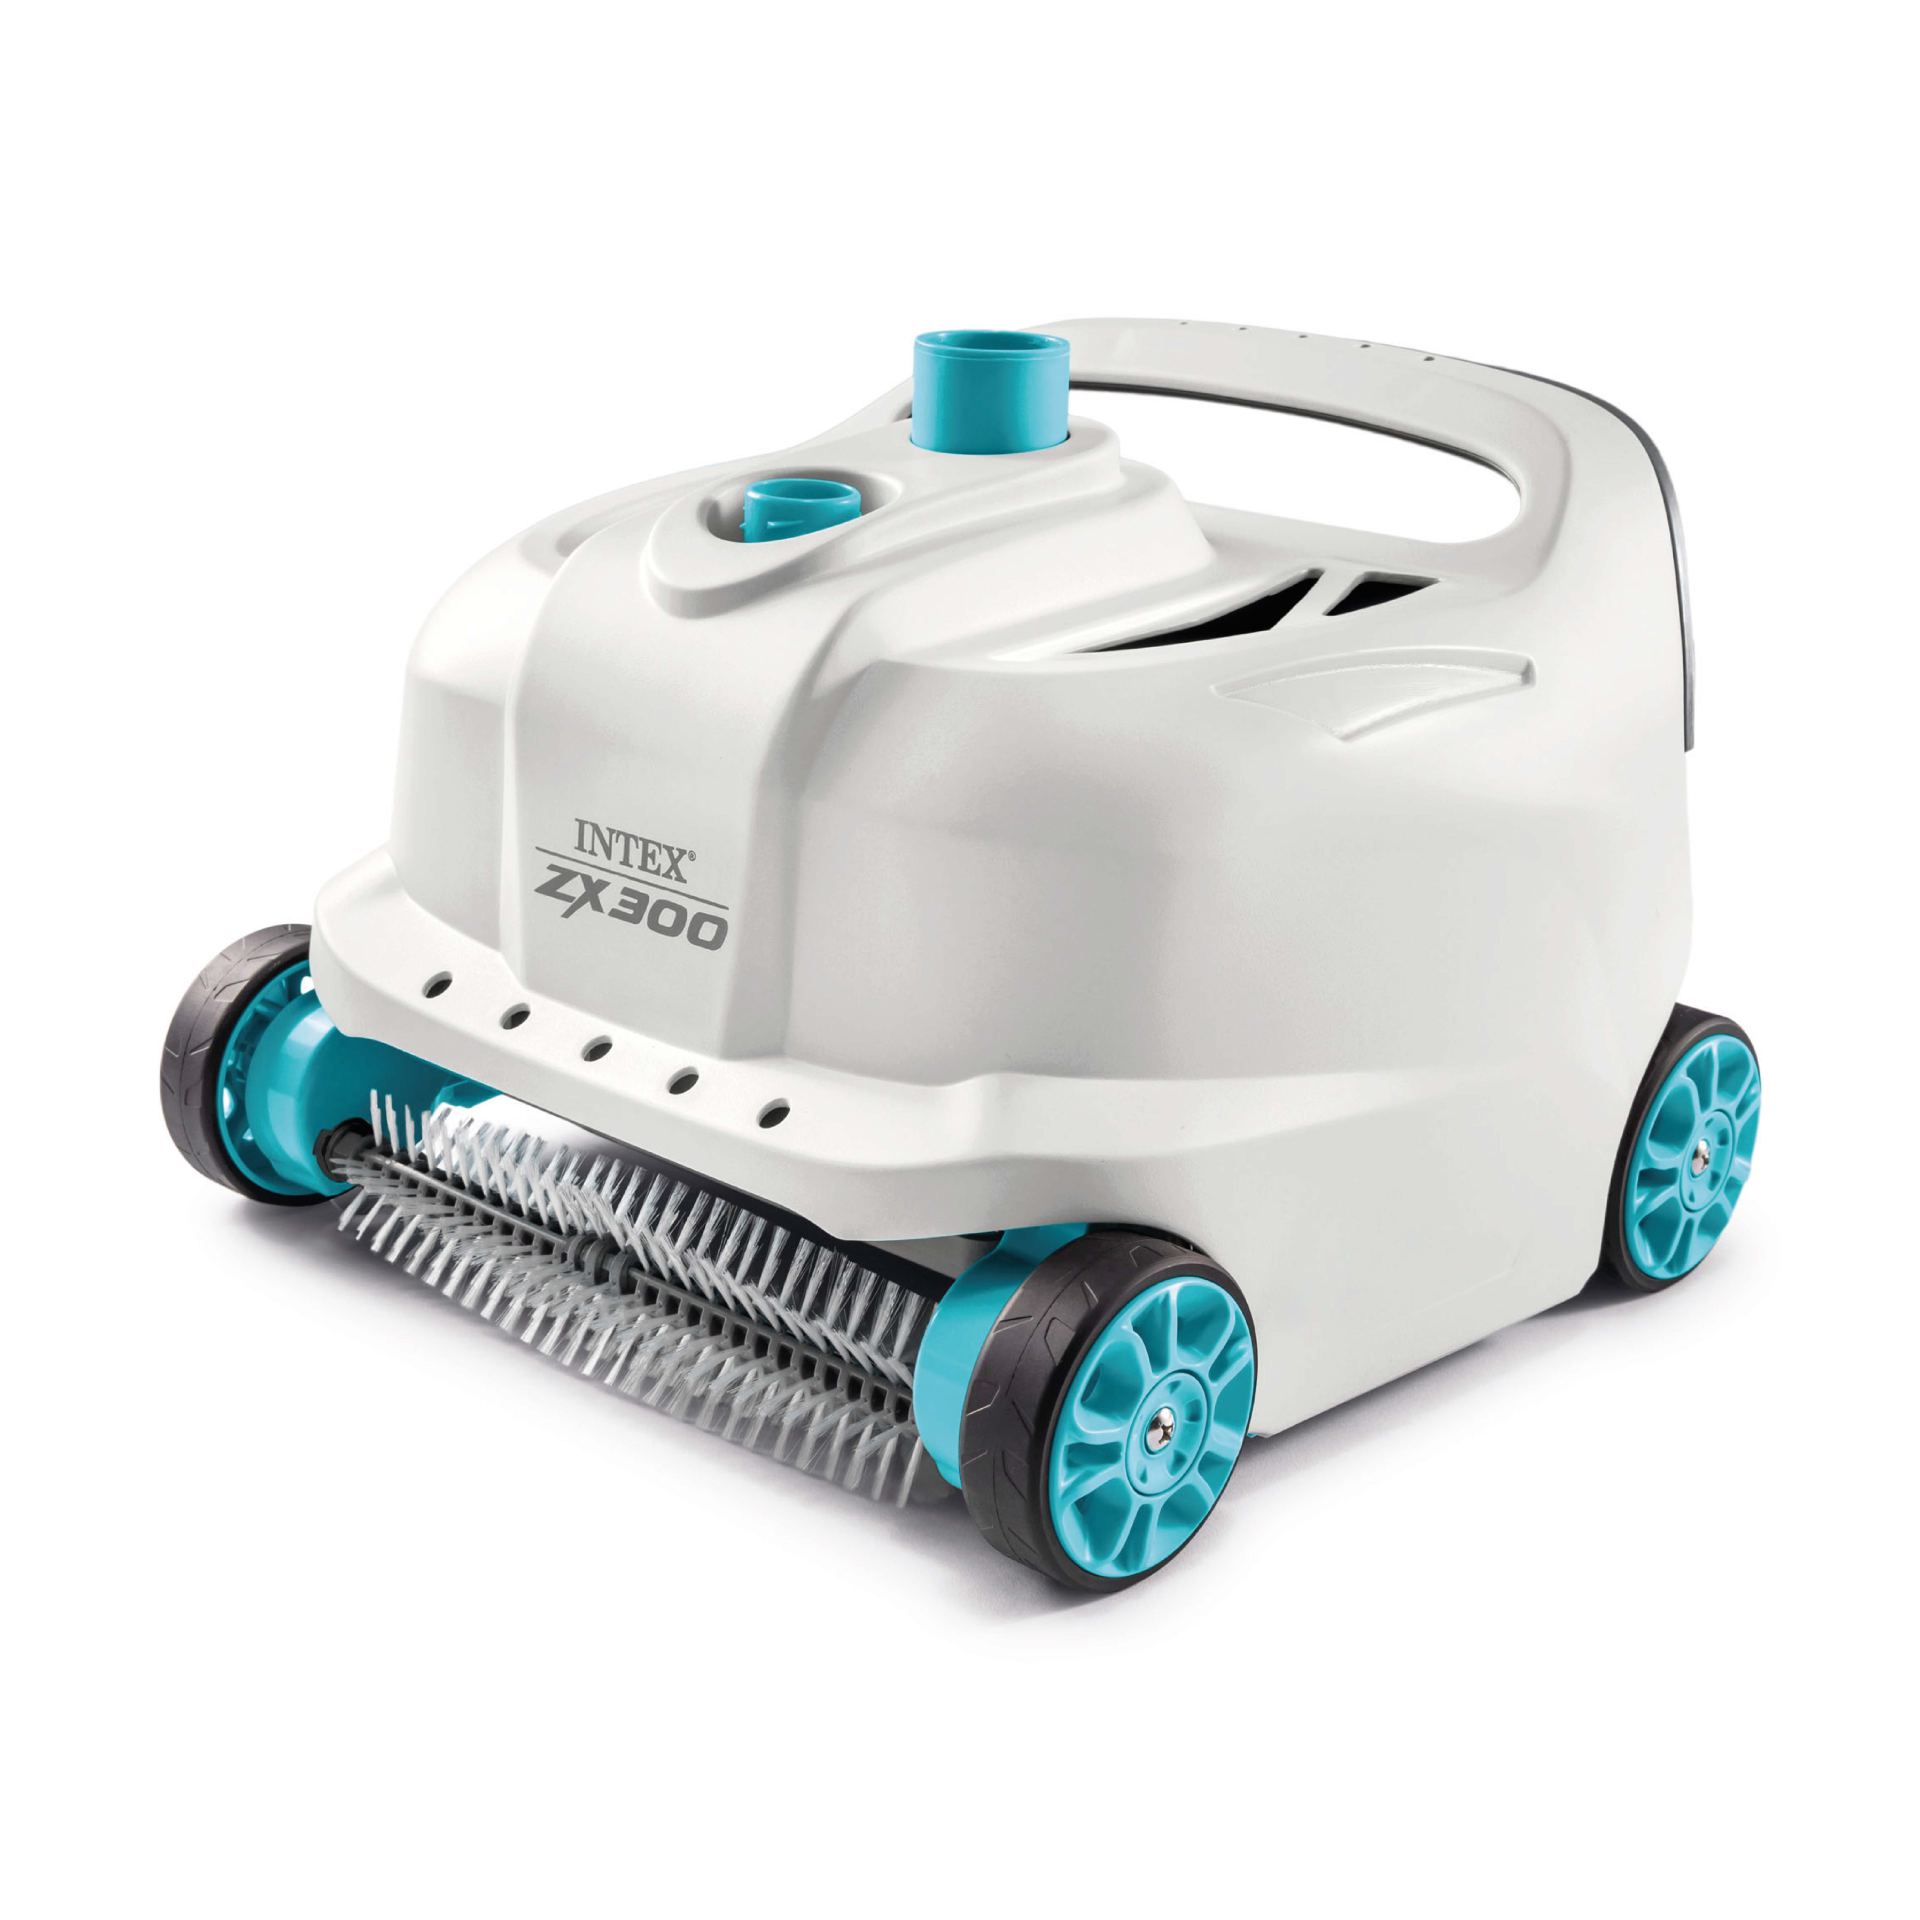 Intex ZX300 deluxe automatic pool cleaner